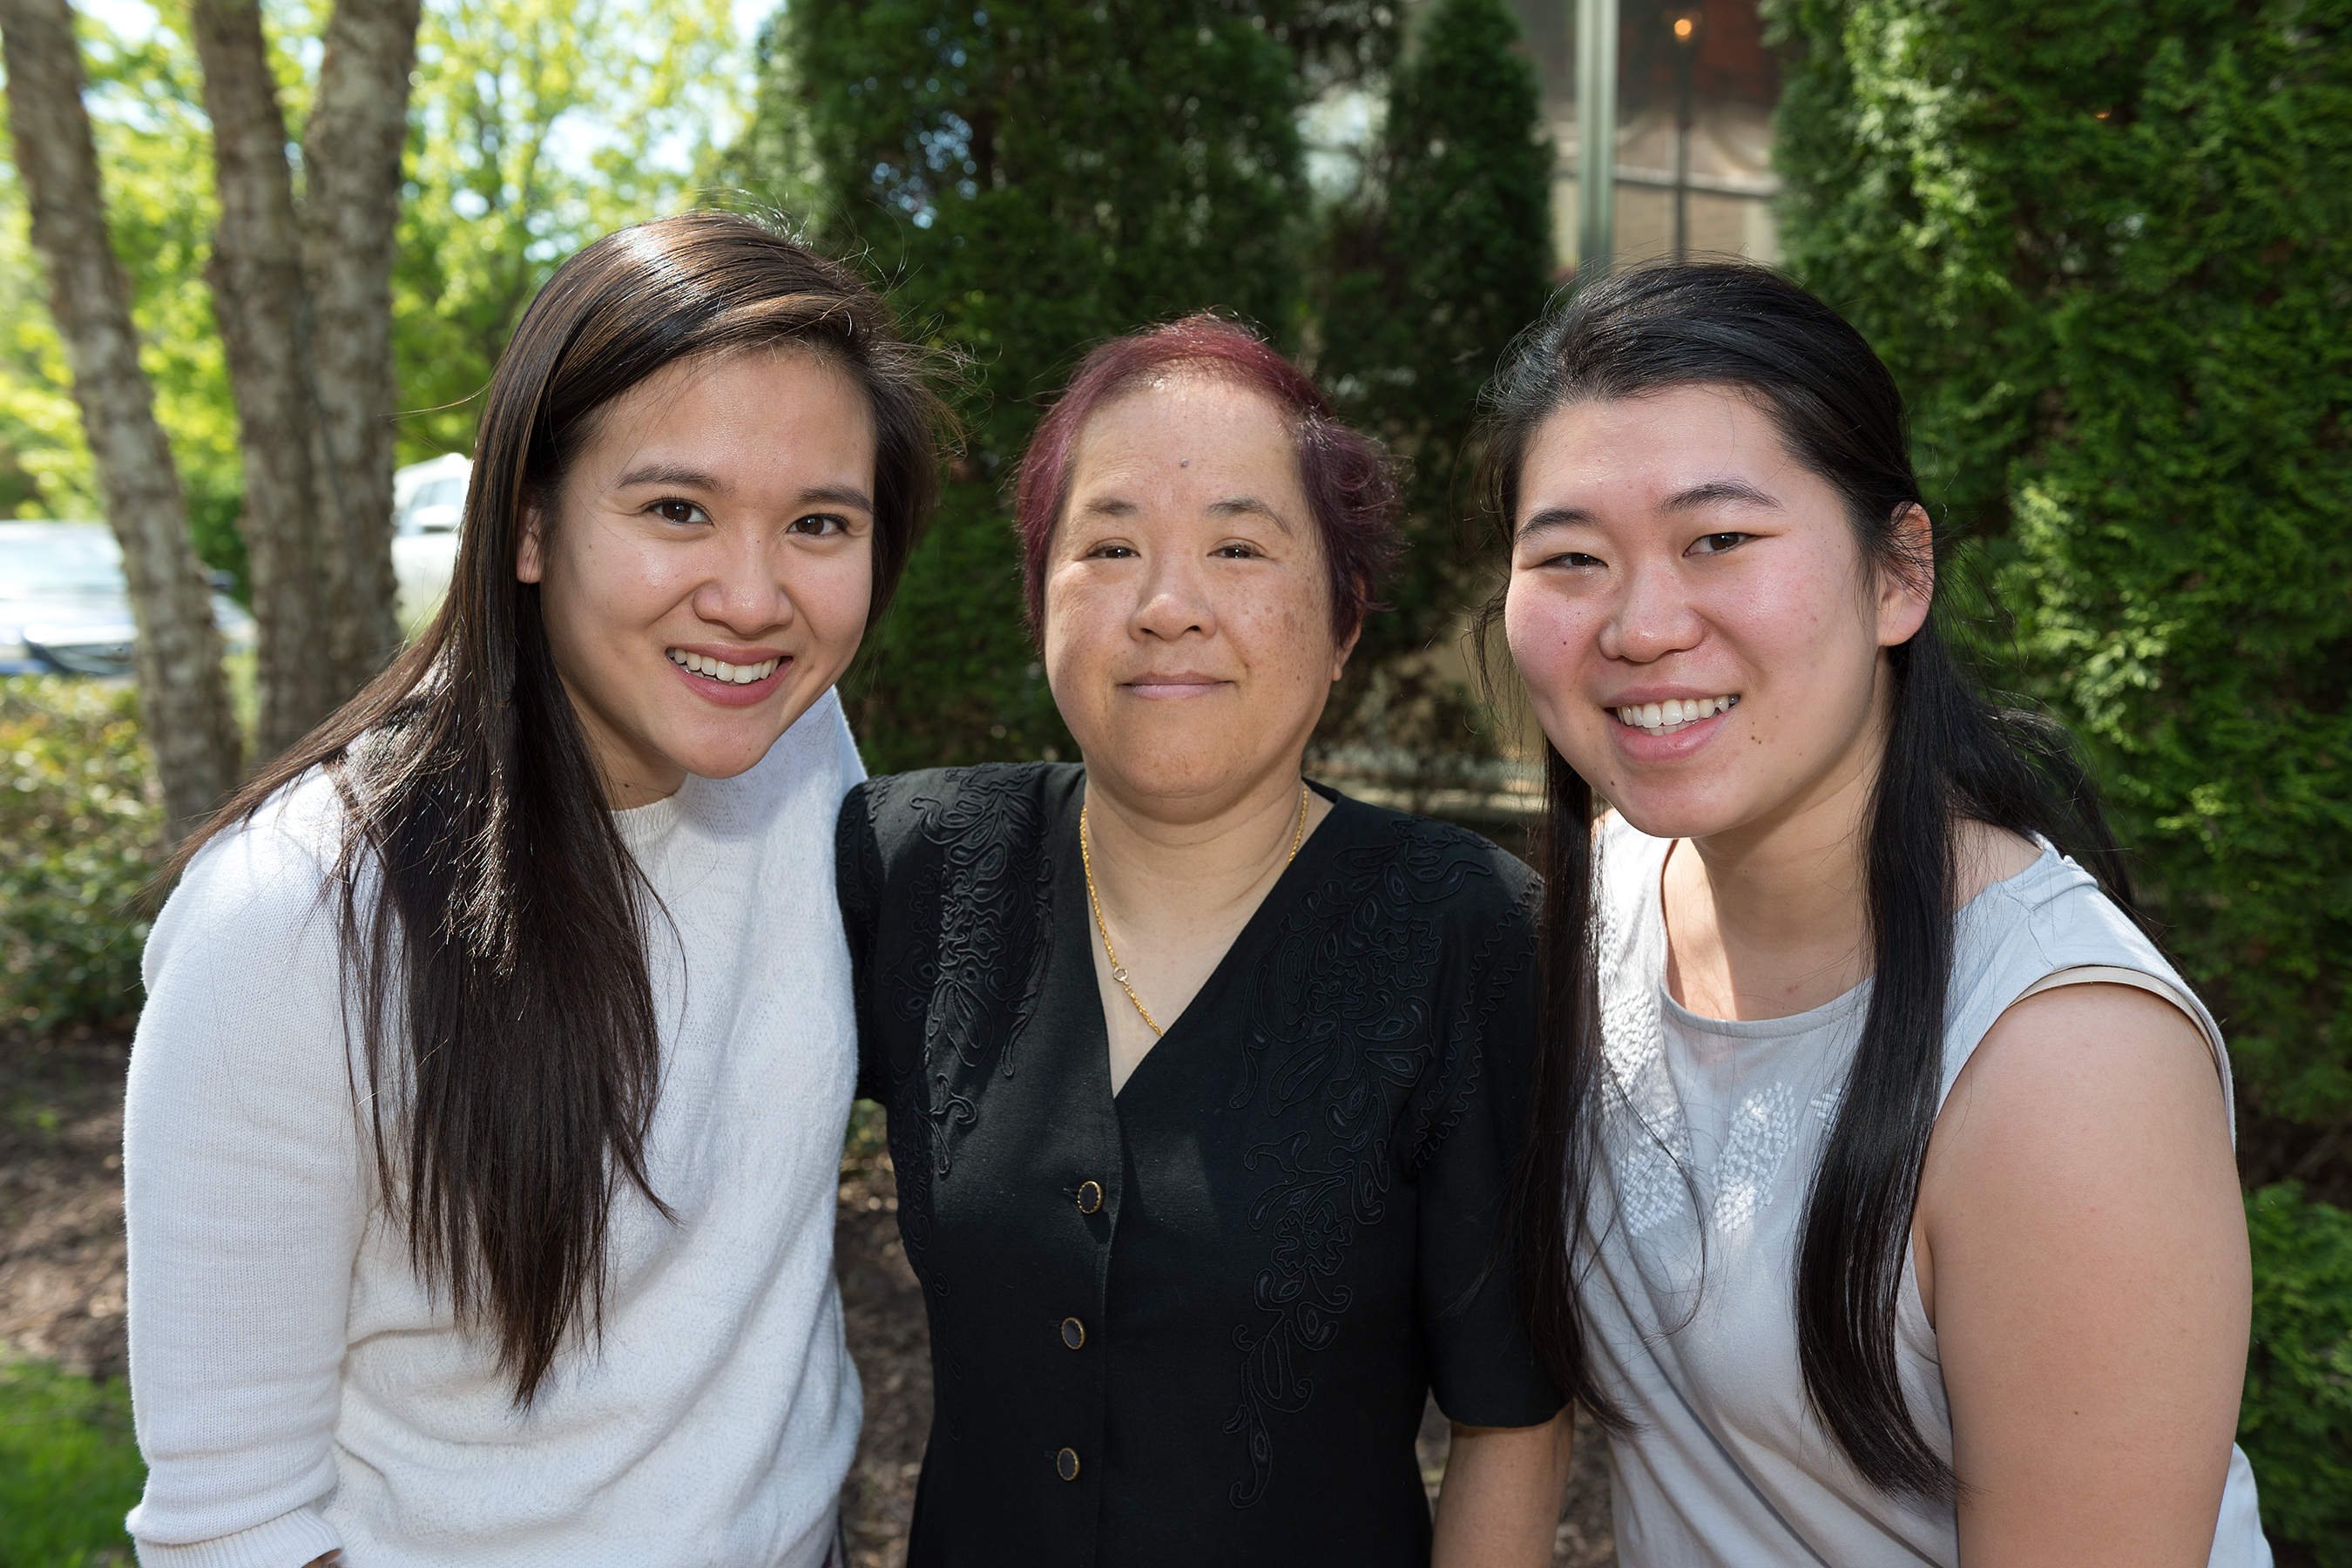 The Class of 2020’s Paula Nguyen (left) and her classmate Sonia Rutten (right) recently met Mary Ding to learn about the life and career of Lillian Chan Ding, M’53, who established a scholarship that supports students who have an interest in service to others as shown by extracurricular volunteerism.